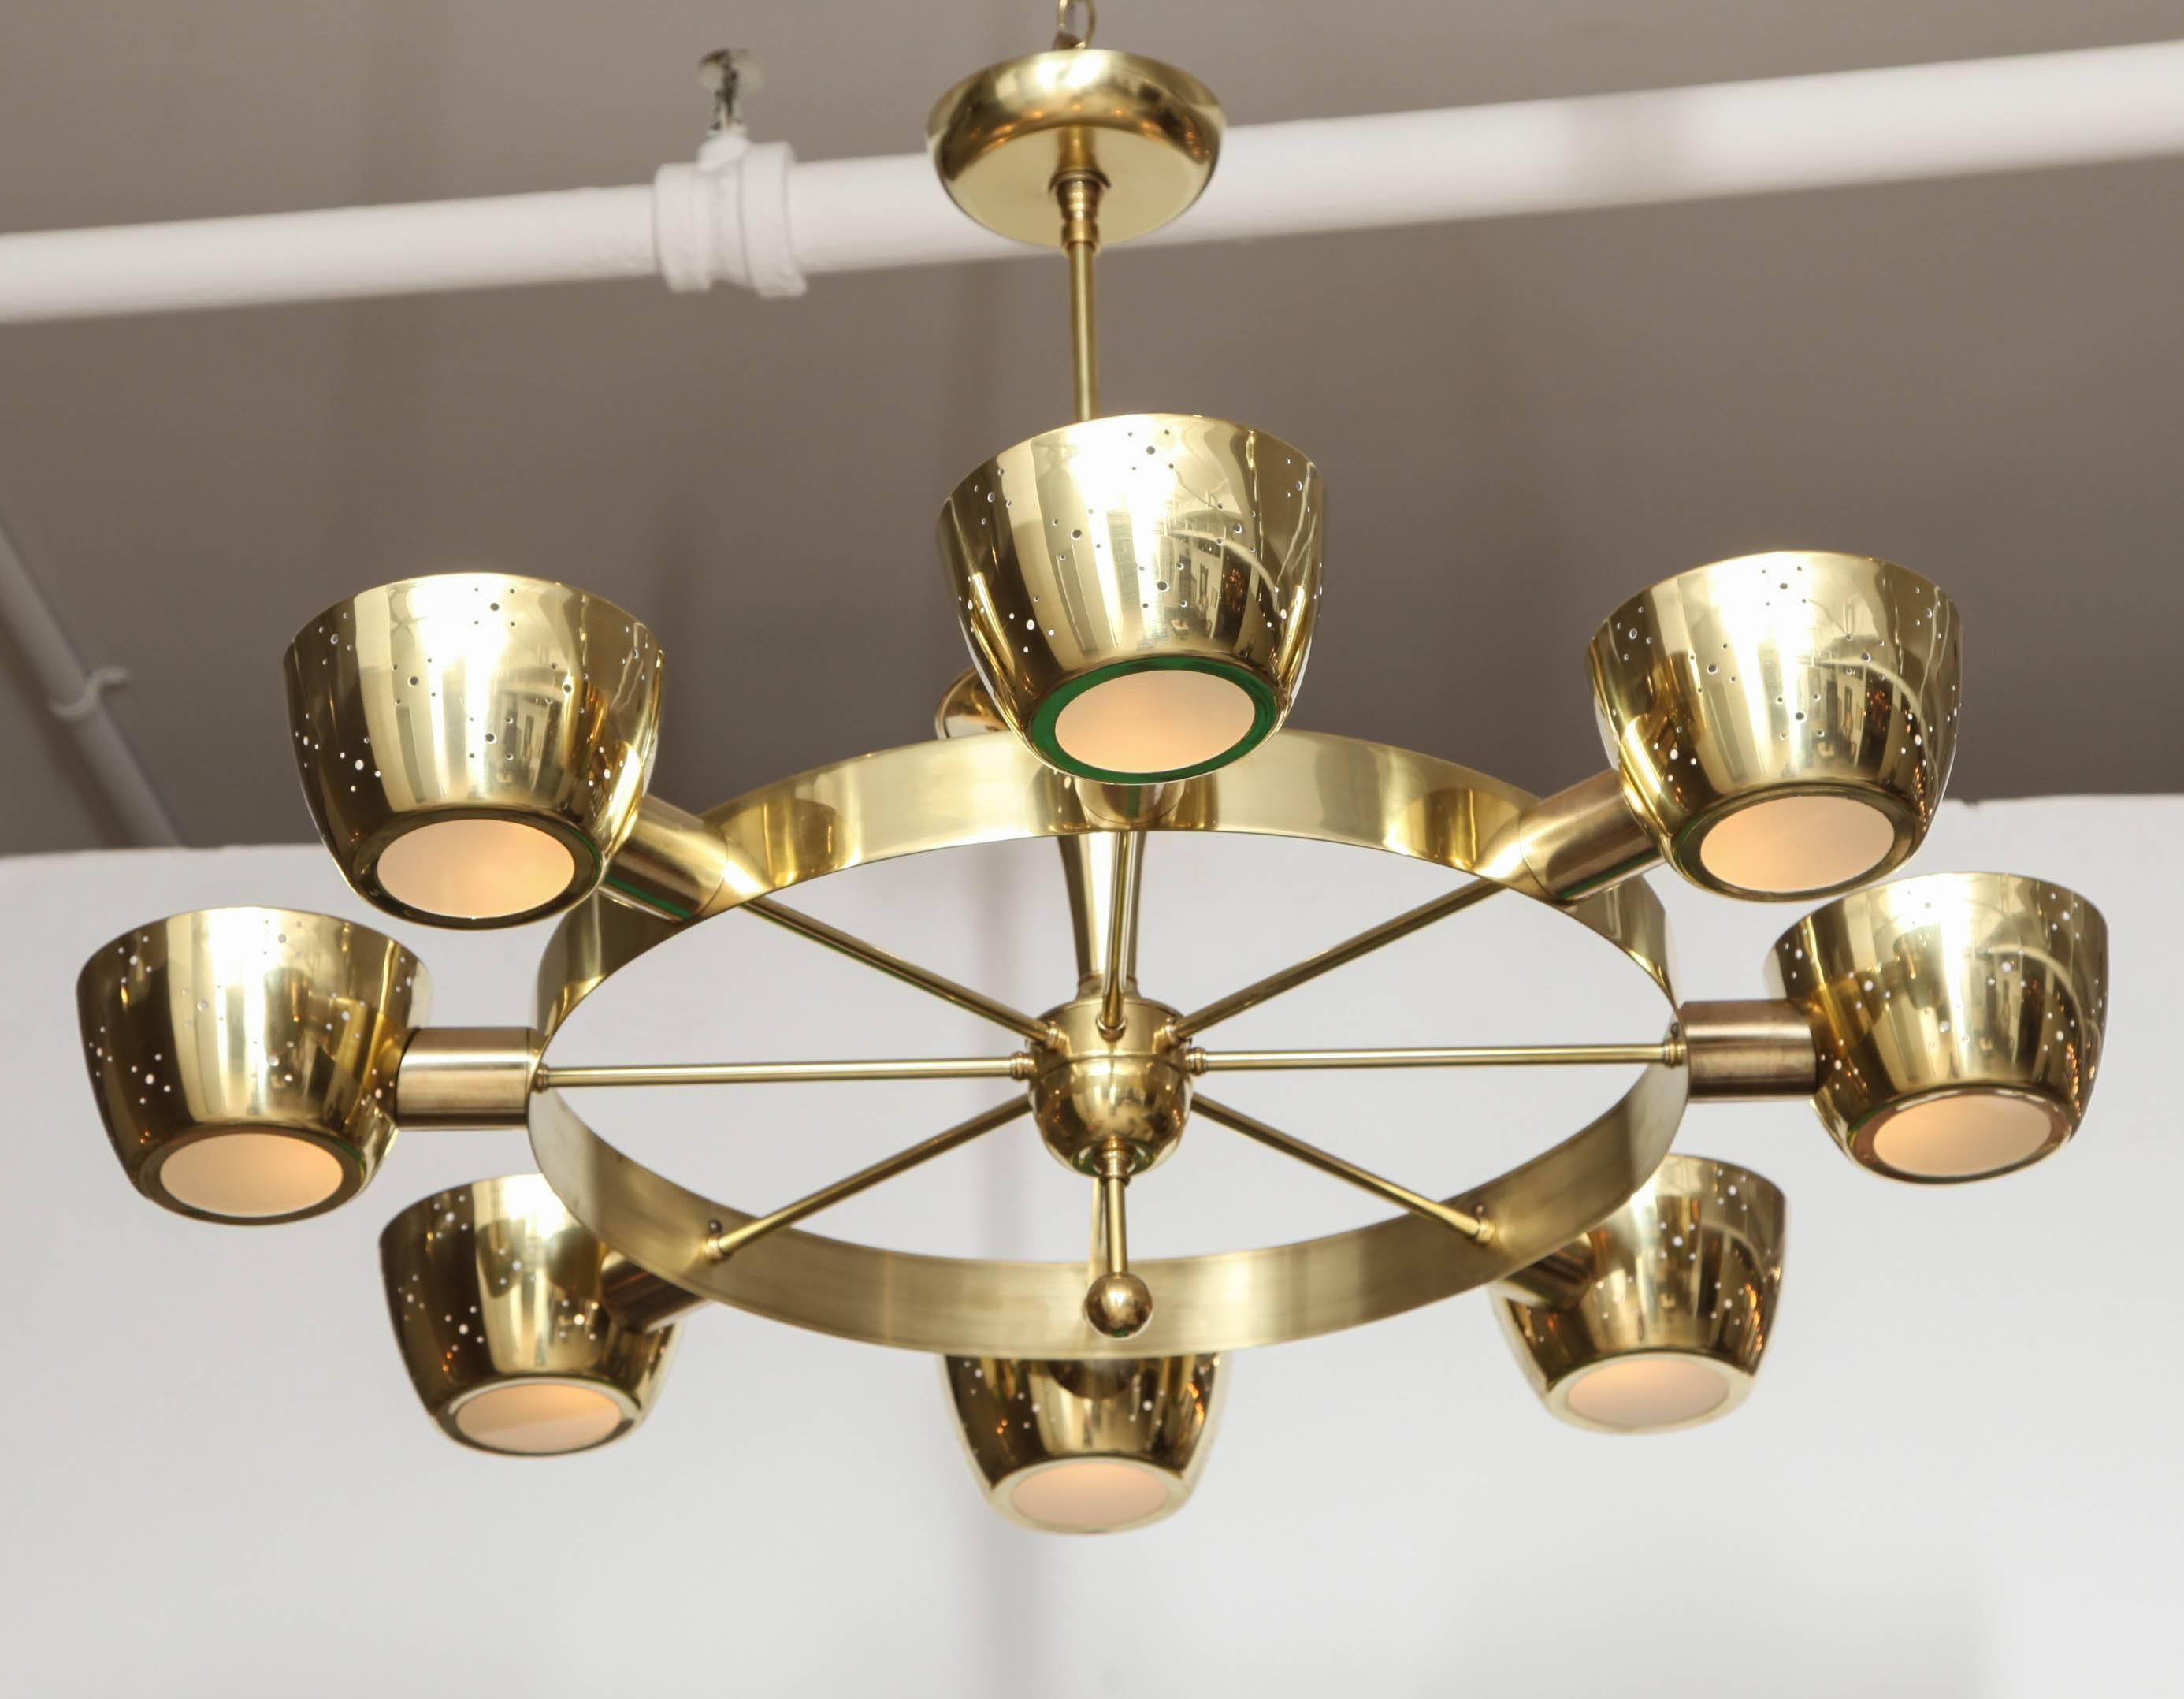 Eight-light cups in pierced brass with frosted glass bottom inserts provide filtered edge lighting, uplighting and down lighting. Newly repolished and rewired, otherwise original throughout. Designed by Gerald Thurston for Lightolier, late 1950s.